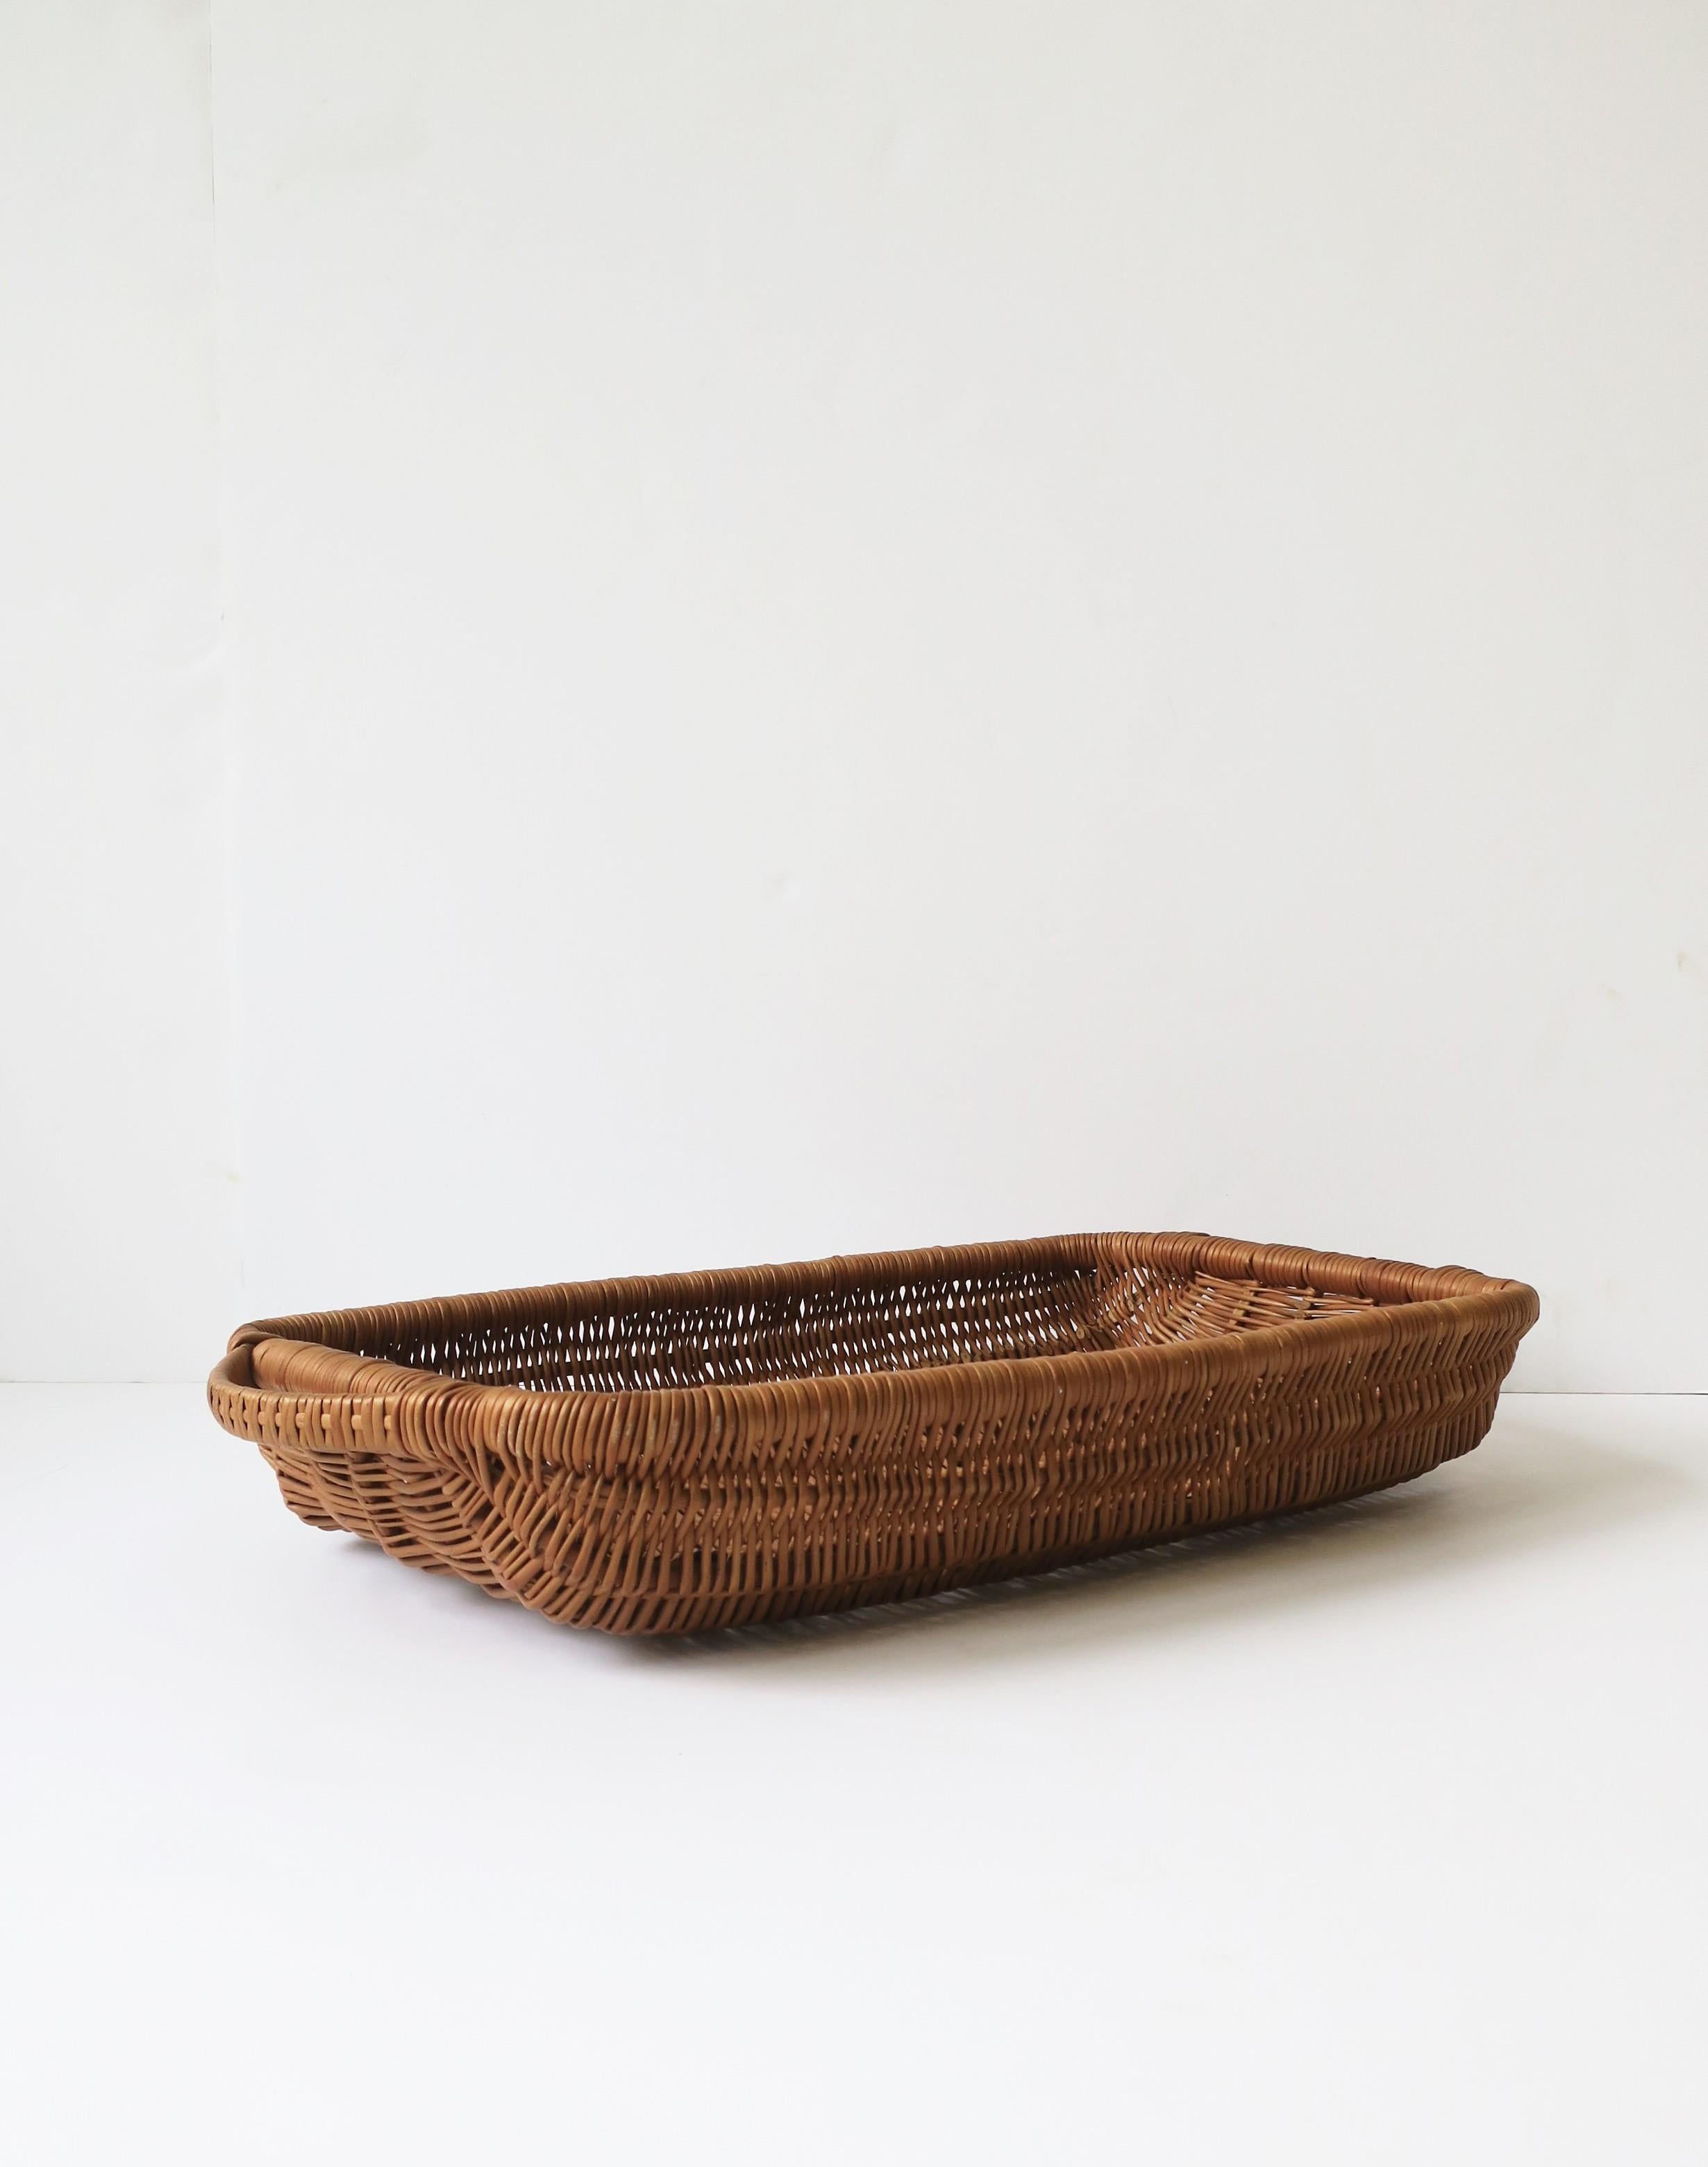 A beautiful and well-made rectangular wicker tray serving basket with handles, circa mid to late-20th century. A great piece for dining/entertaining or for gathering in the garden. Dimensions: 3.25